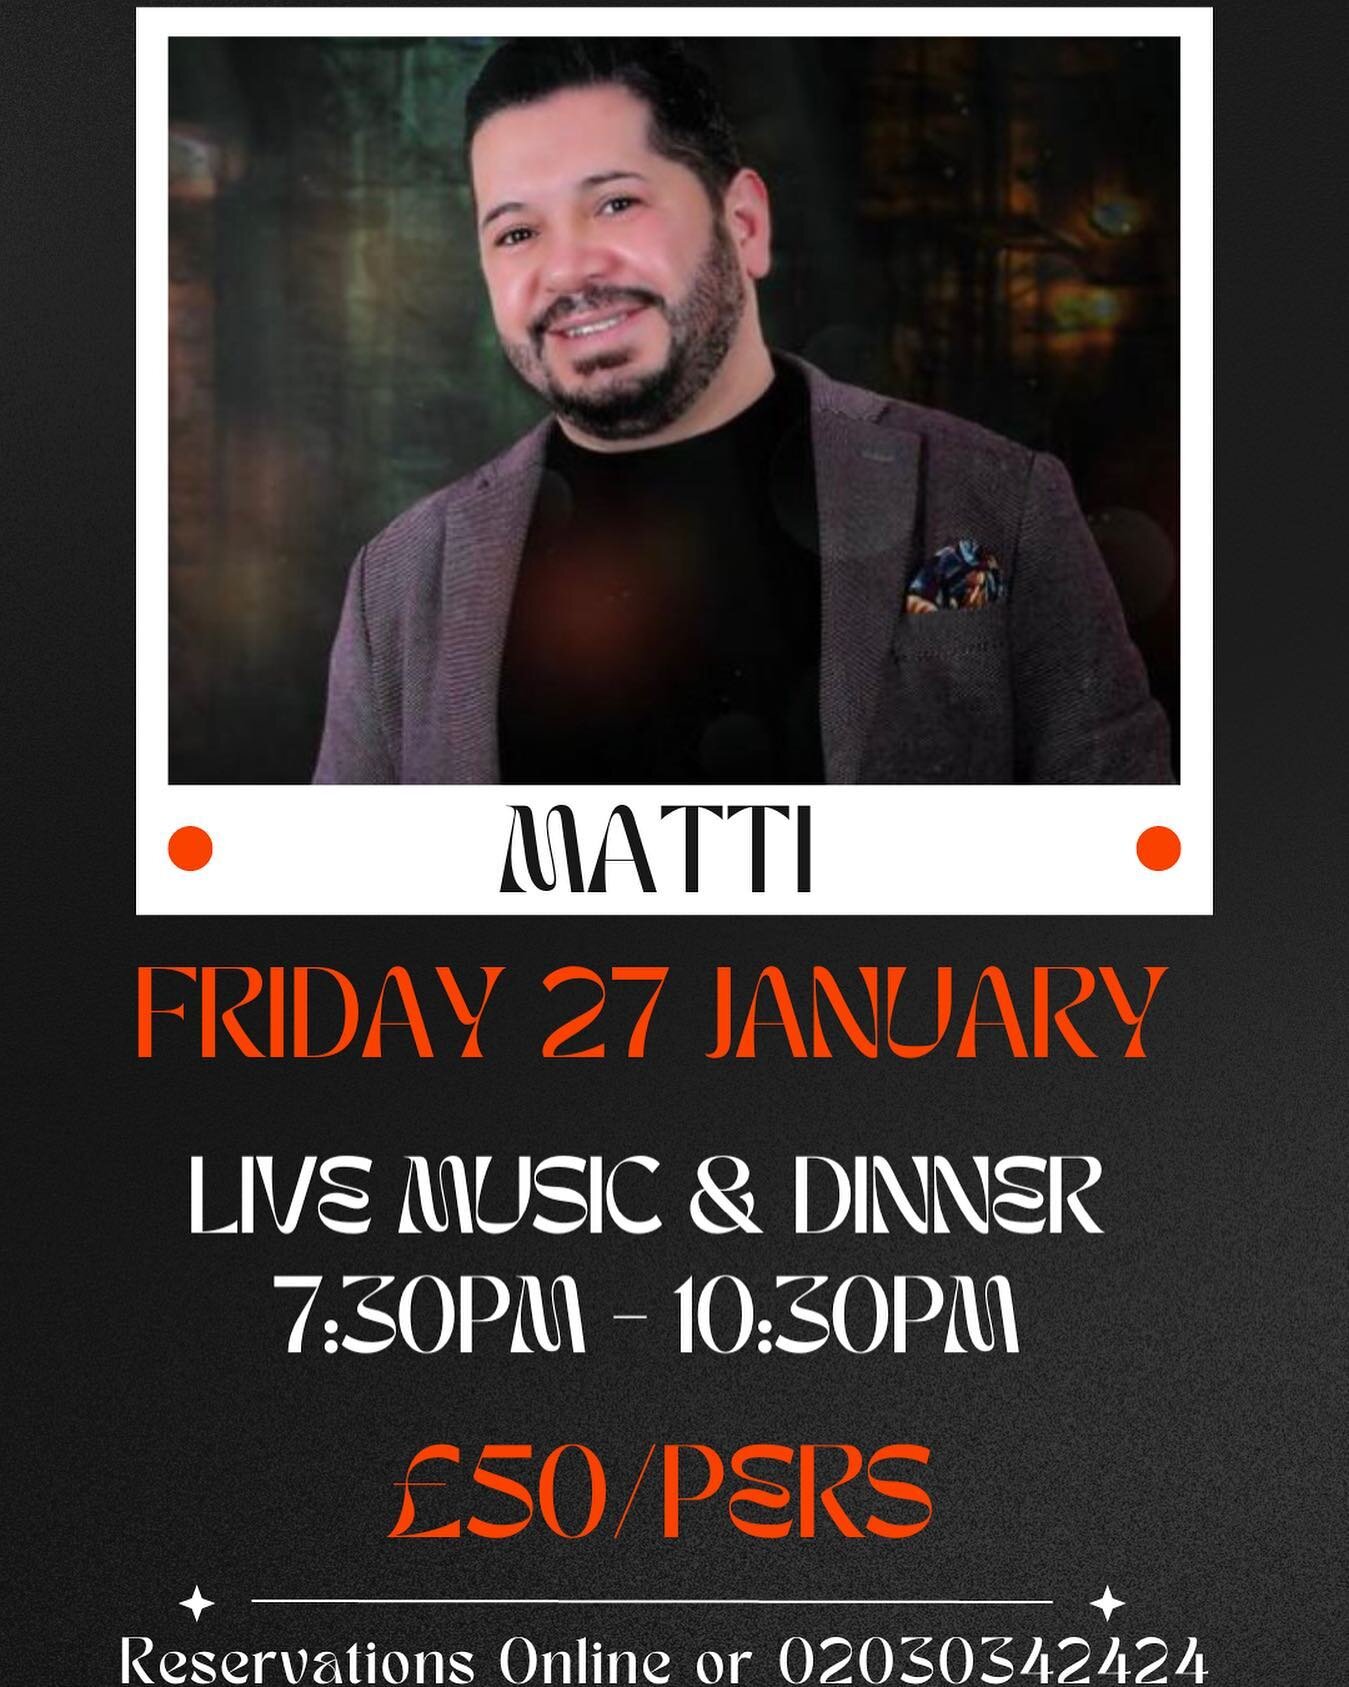 Come and join us for a lovely evening with Matti and his band, accompanied with our succulent mezzes and grills&hellip;Friday 27th of January. https://nourakingston.com/live-music-fridays

*
*
*

#food #foodporn #wedding #instafood #foodie #London #b